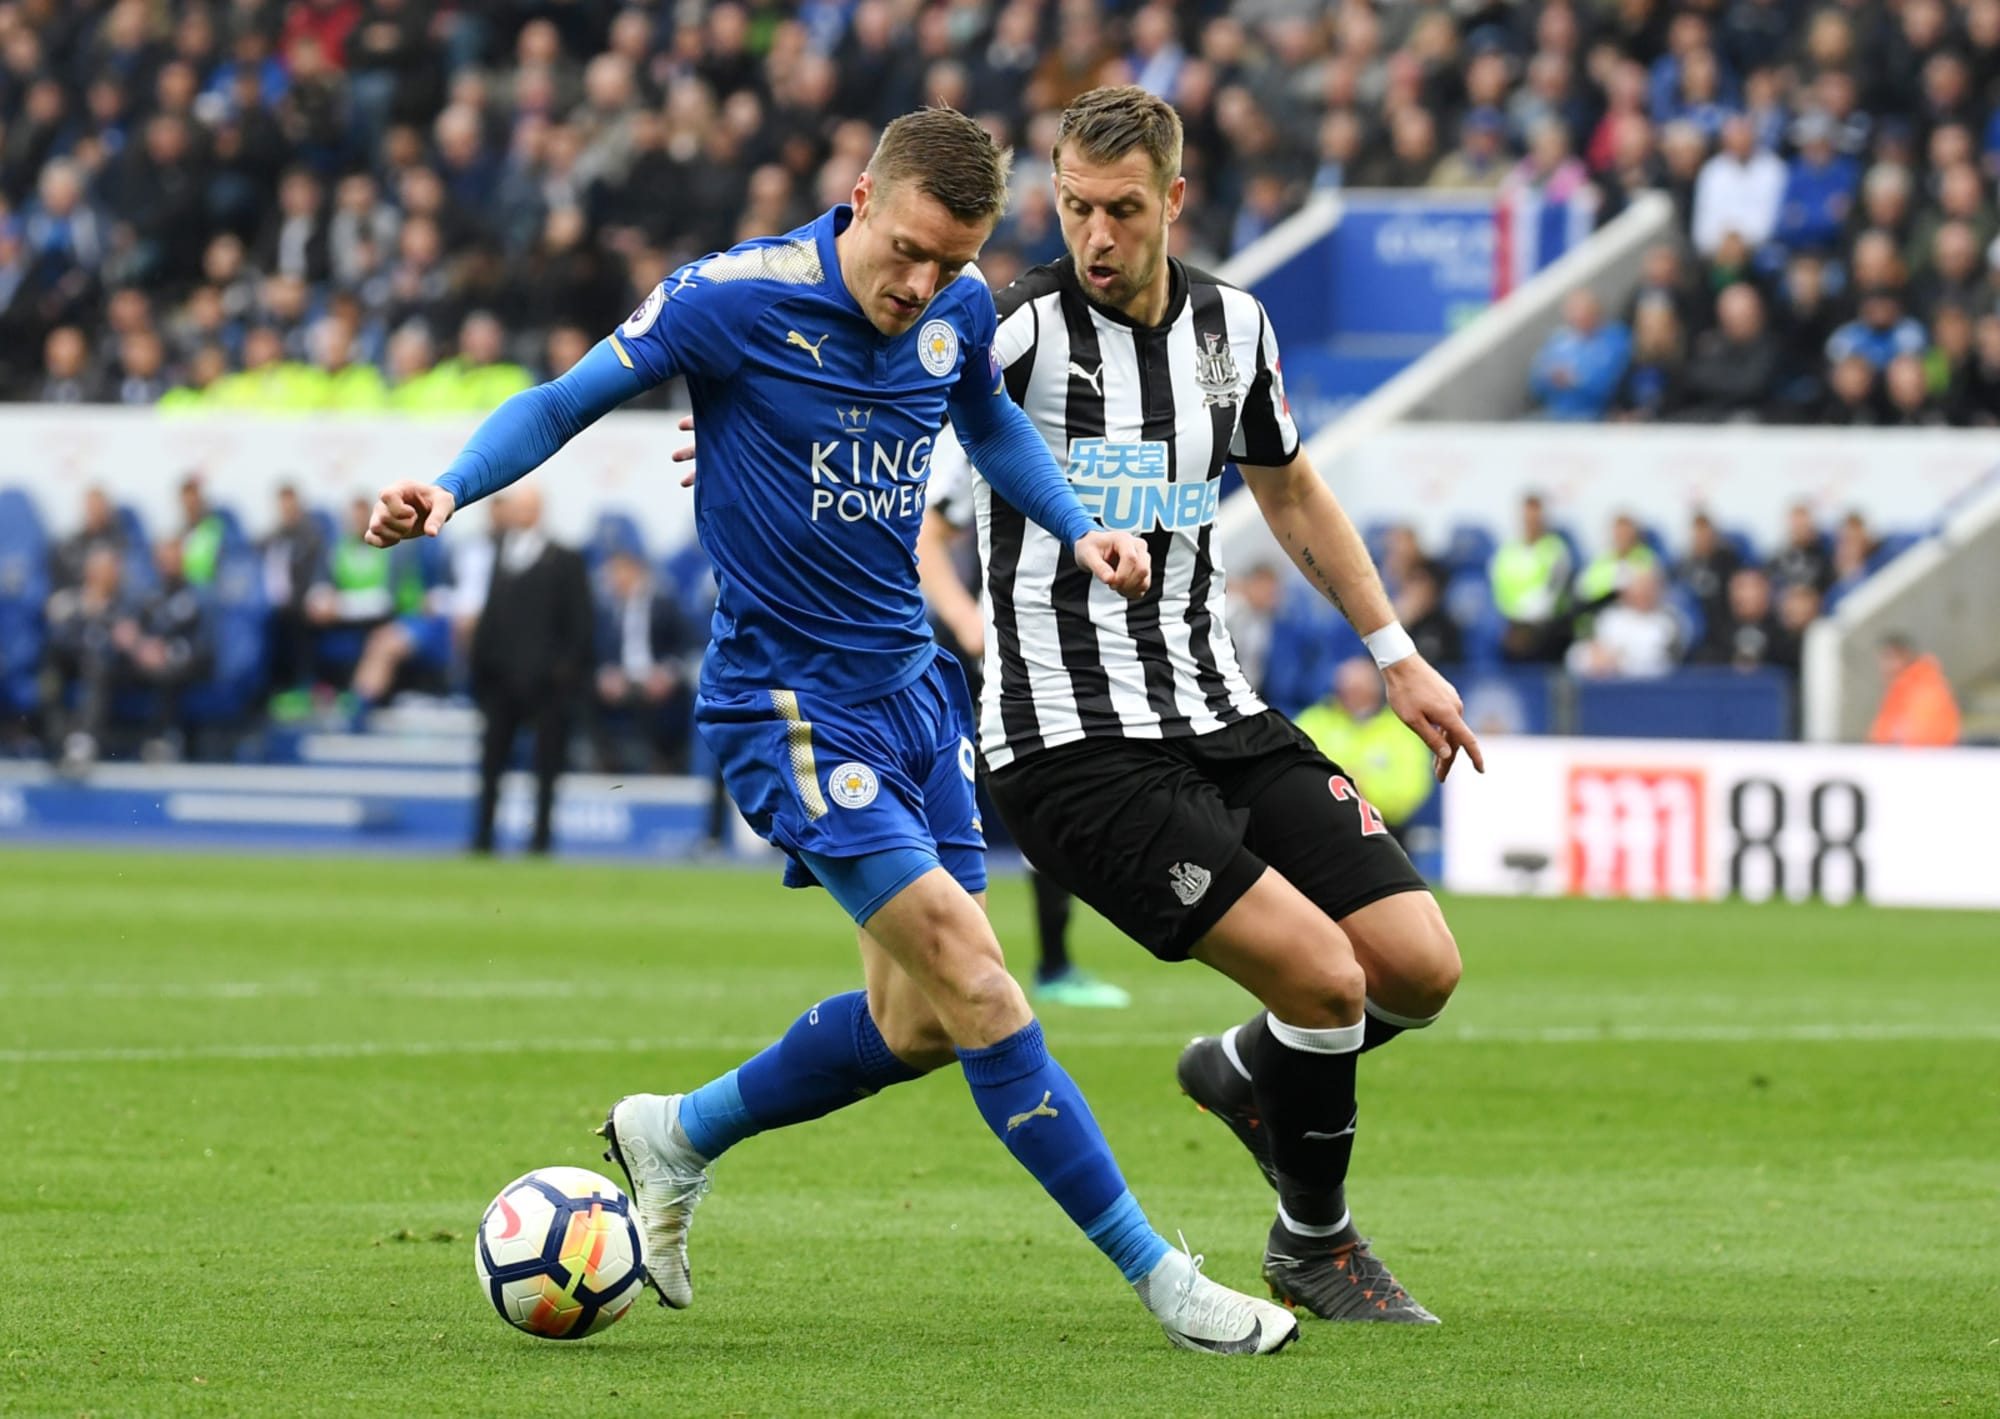 Leicester City Vs Newcastle - Image to u